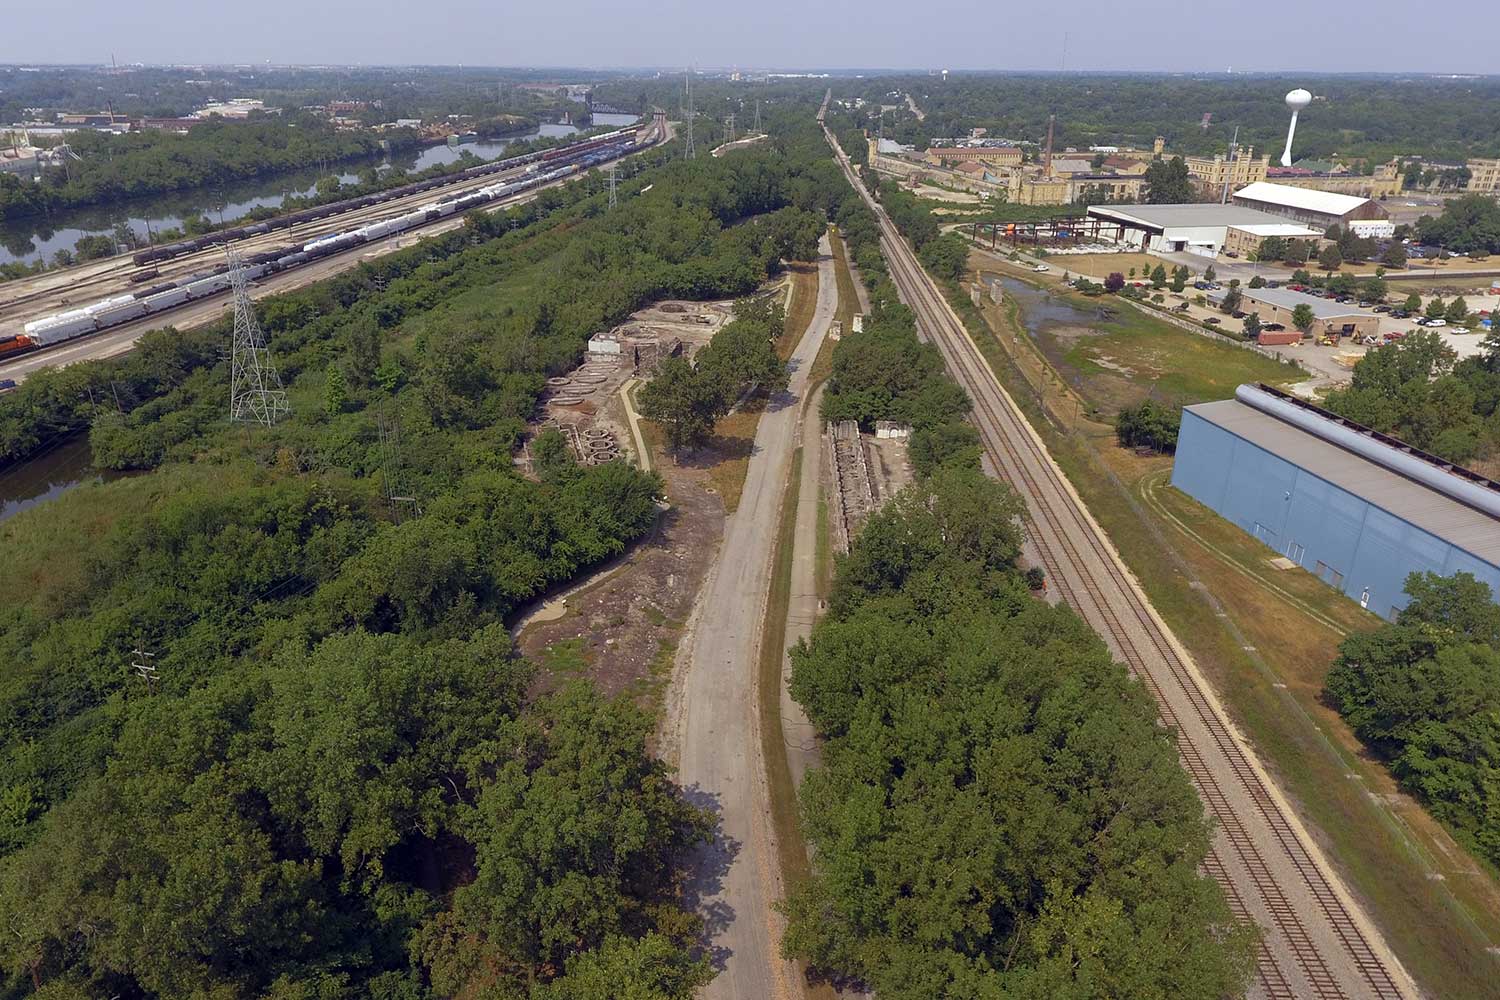 An aerial view of railroad tracks and a road running alongside the remains of an old steel mill.